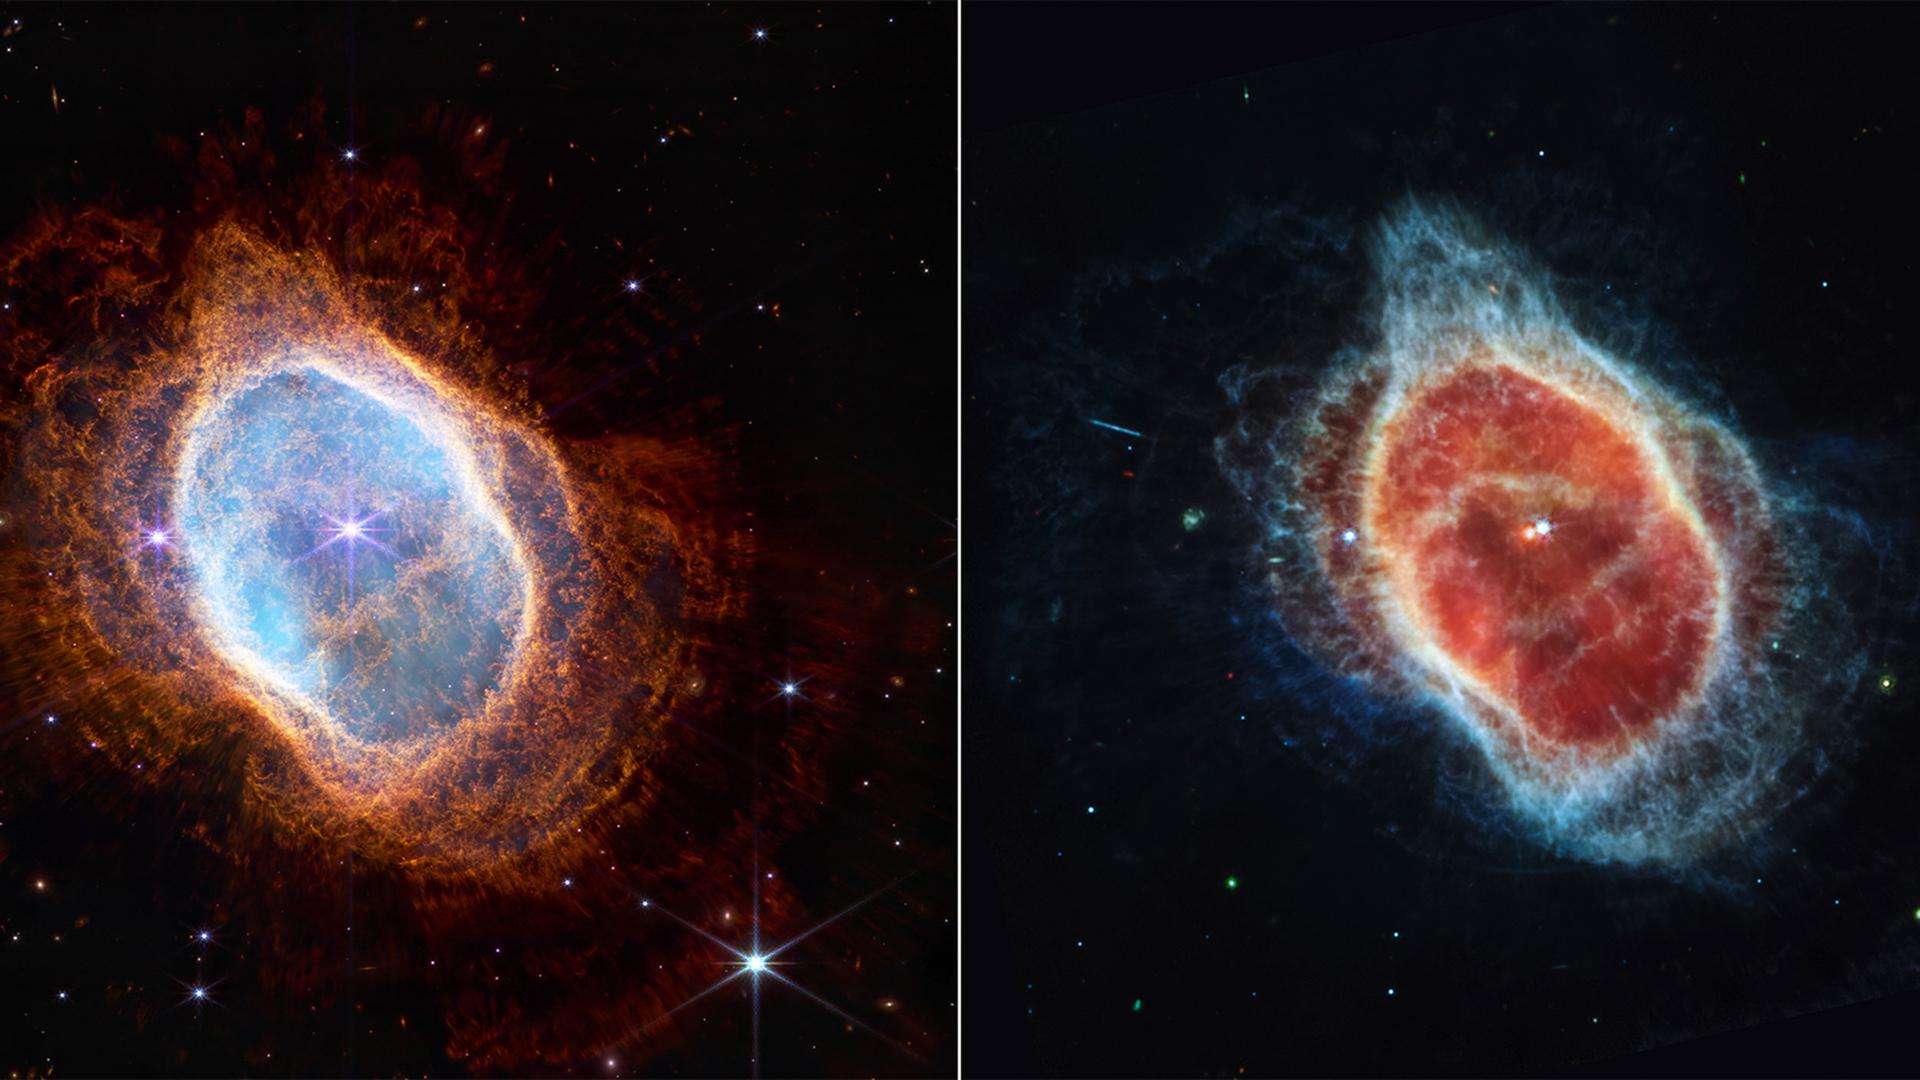 This combo of images released by NASA shows a side-by-side comparison of observations of the Southern Ring Nebula in near-infrared light, at left, and mid-infrared light, at right, from the Webb Telescope